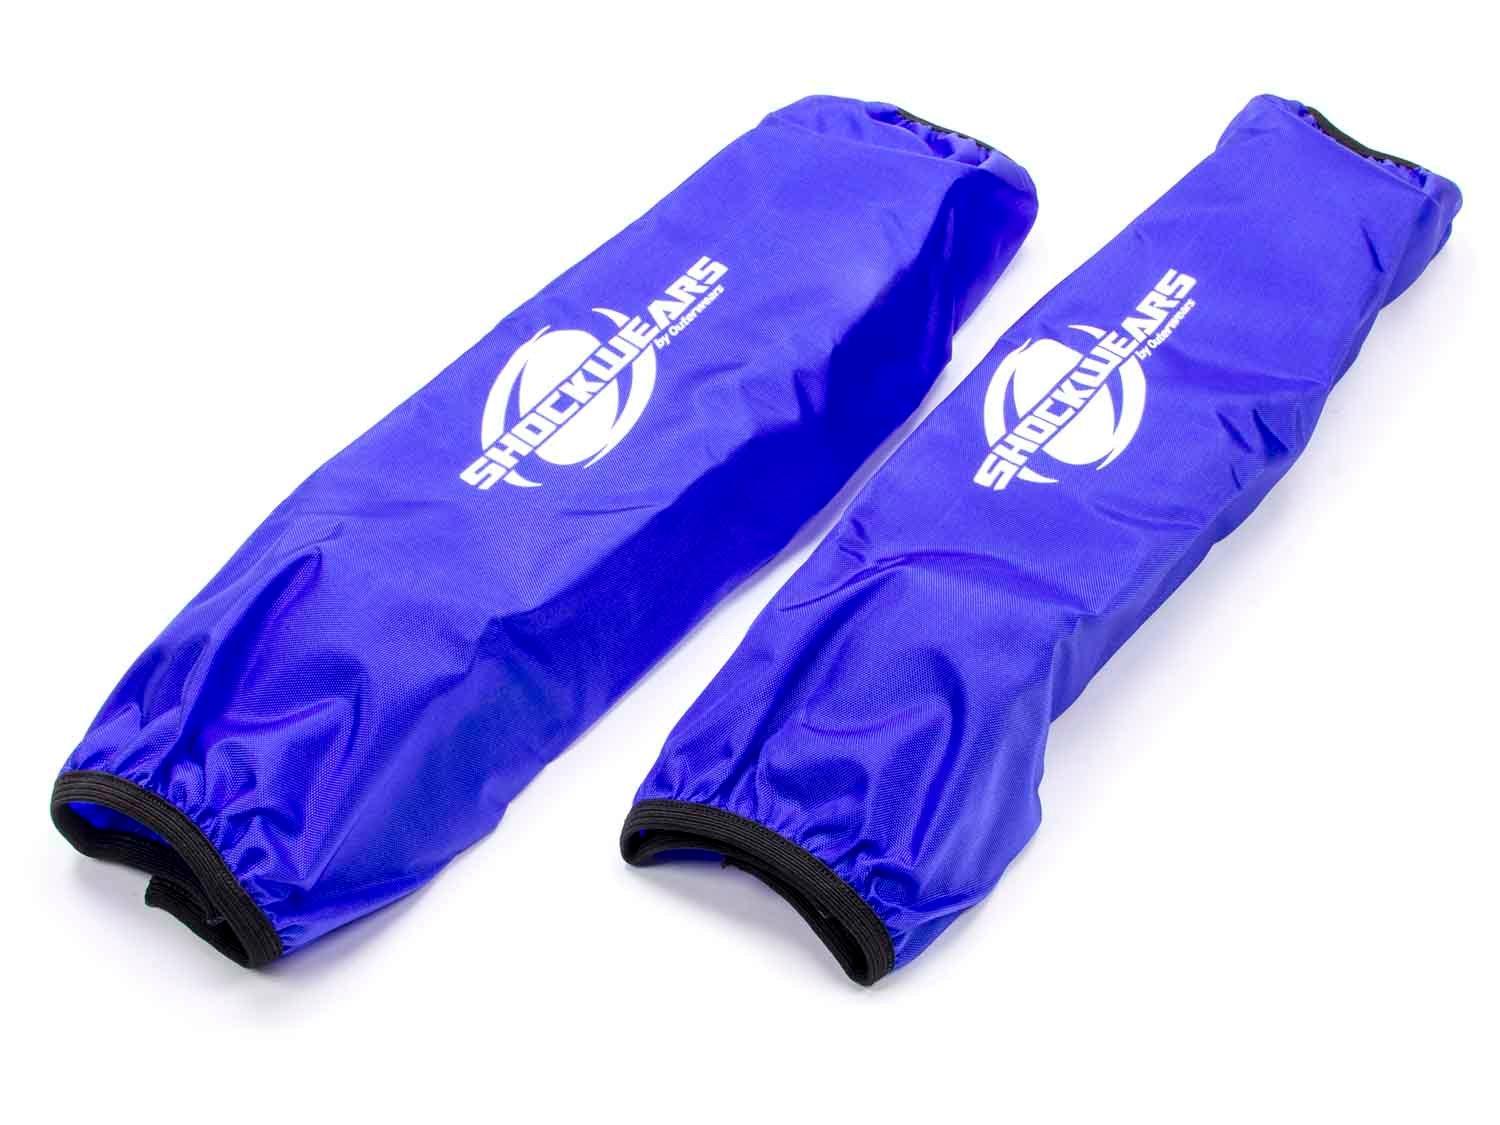 Shockwear 5in x 16in Blue Pair - Burlile Performance Products